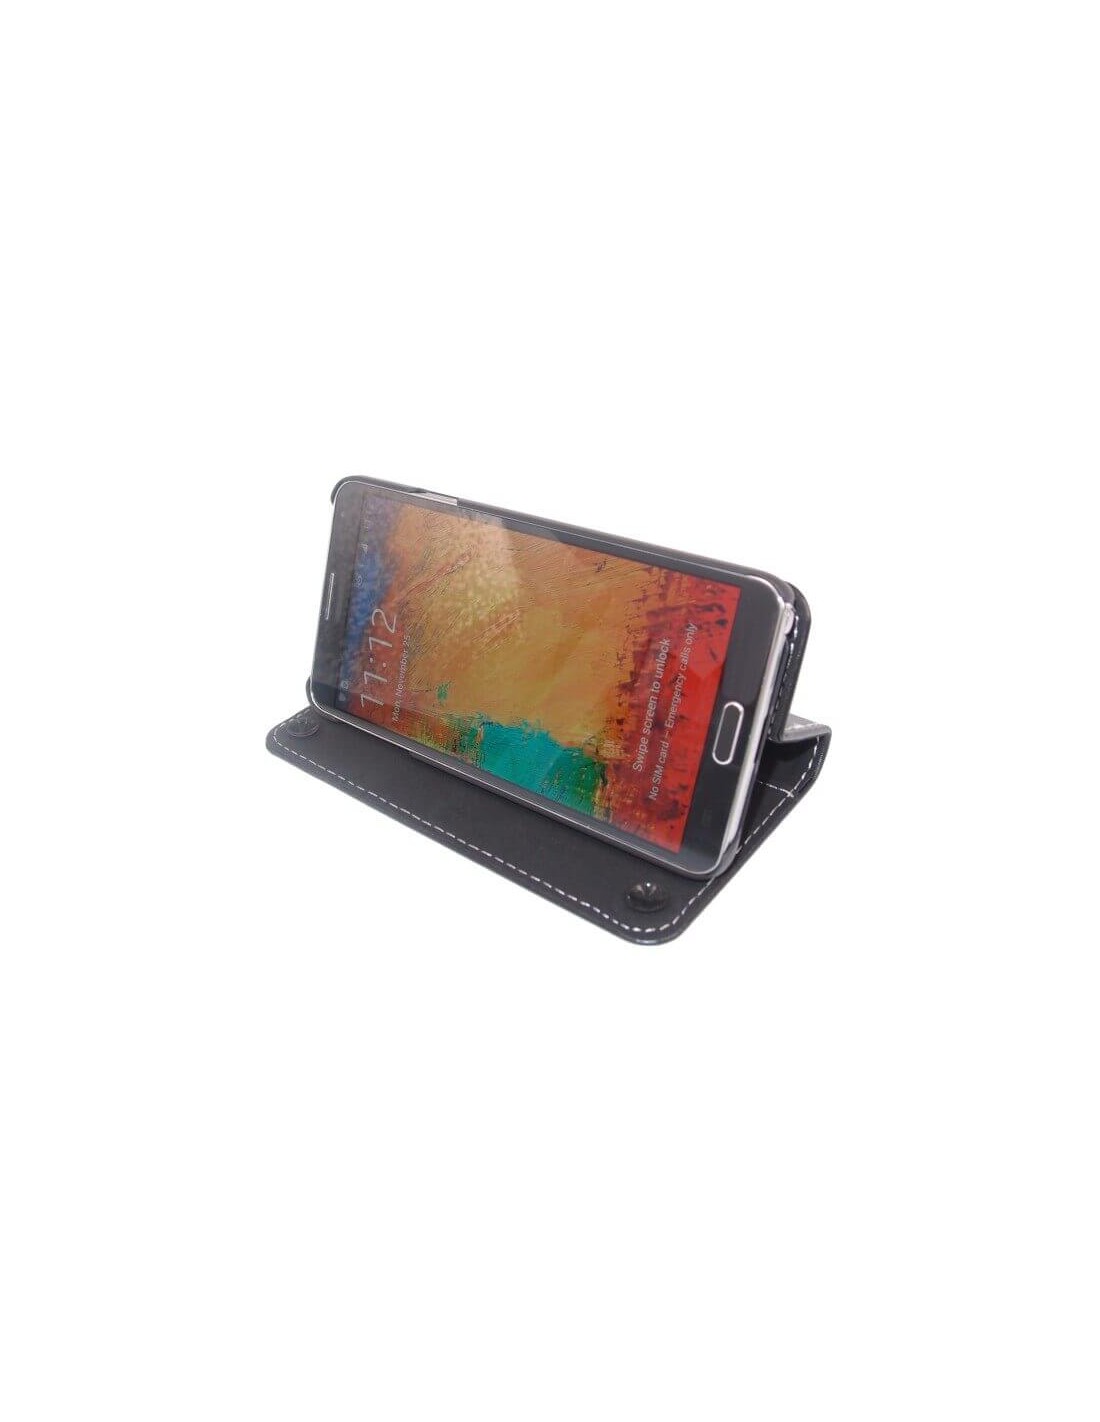 Battery for Samsung Galaxy Note 3, Galaxy Note 3 LTE, Galaxy Note III, flip cover 3.8V, 6400mAh - 24.32Wh